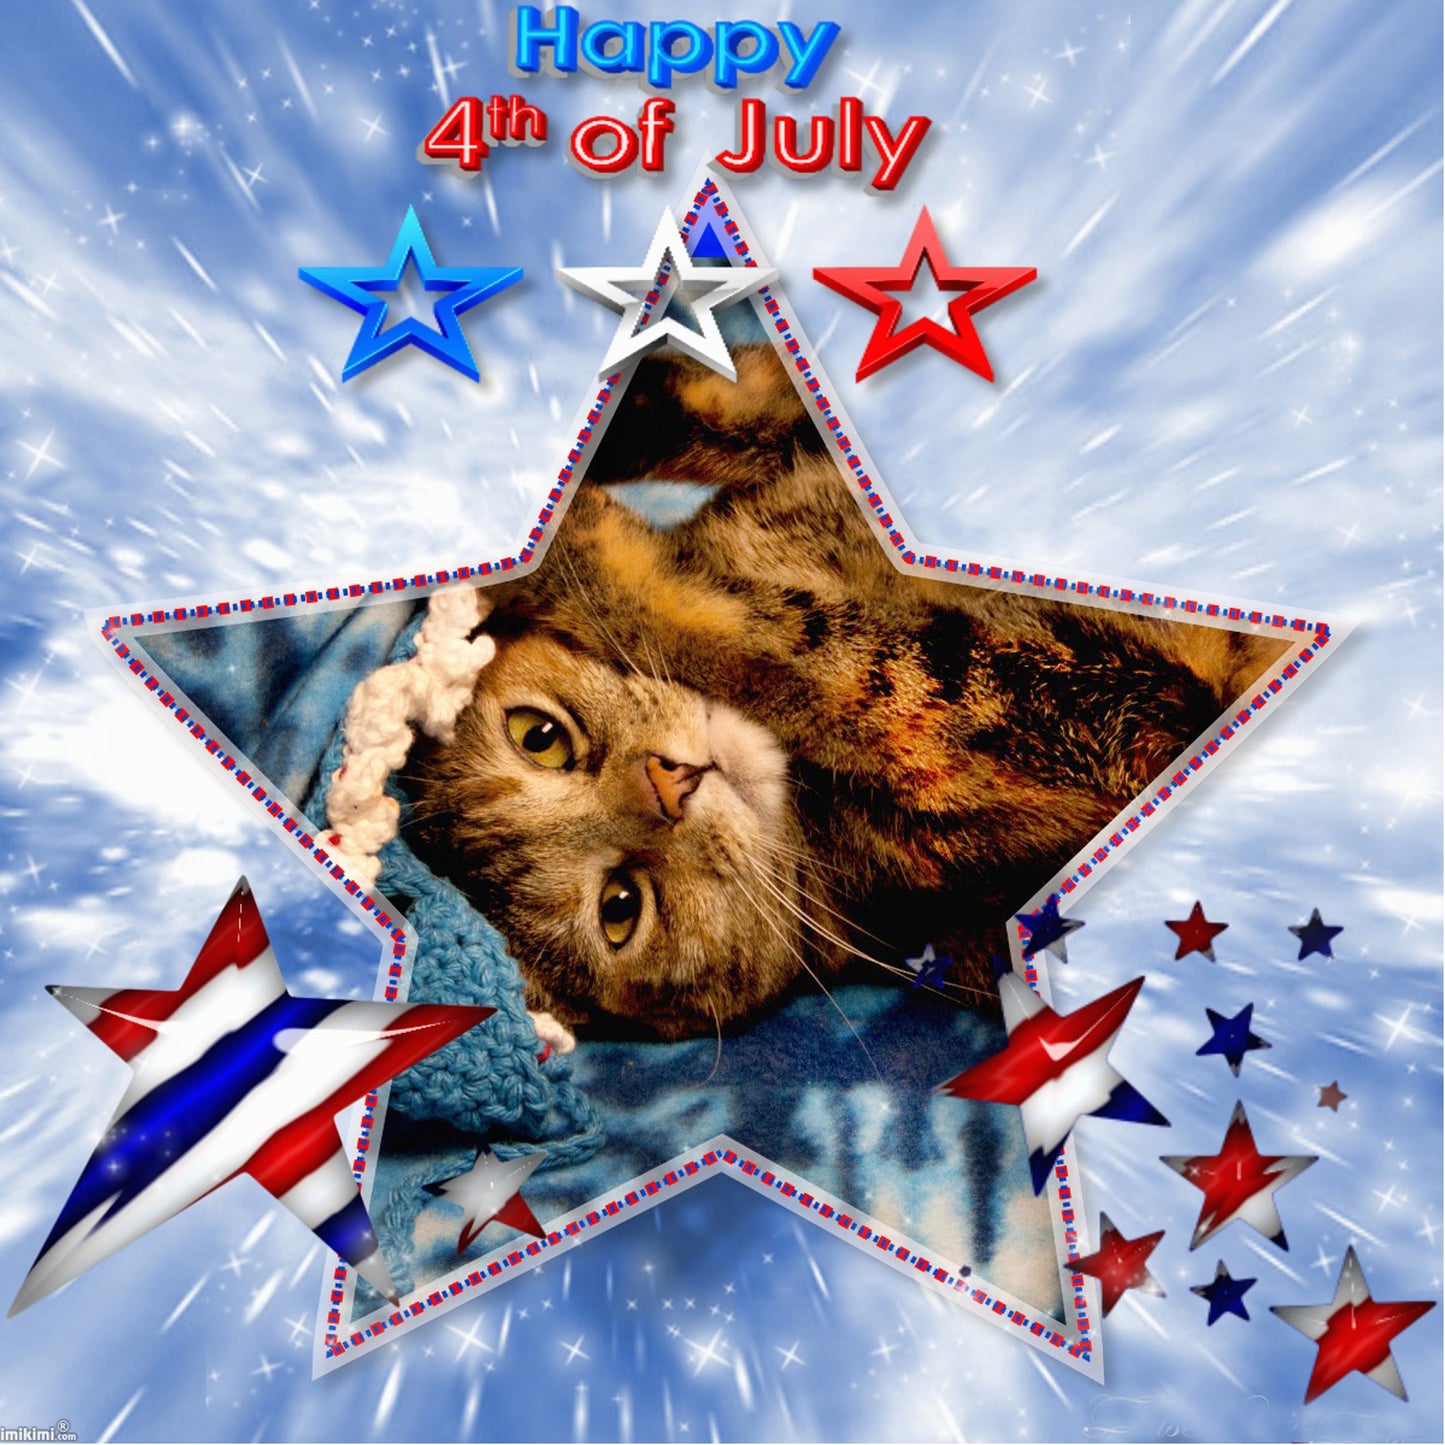 Happy 4th of July Digital Card - Peaches & Paprika cats